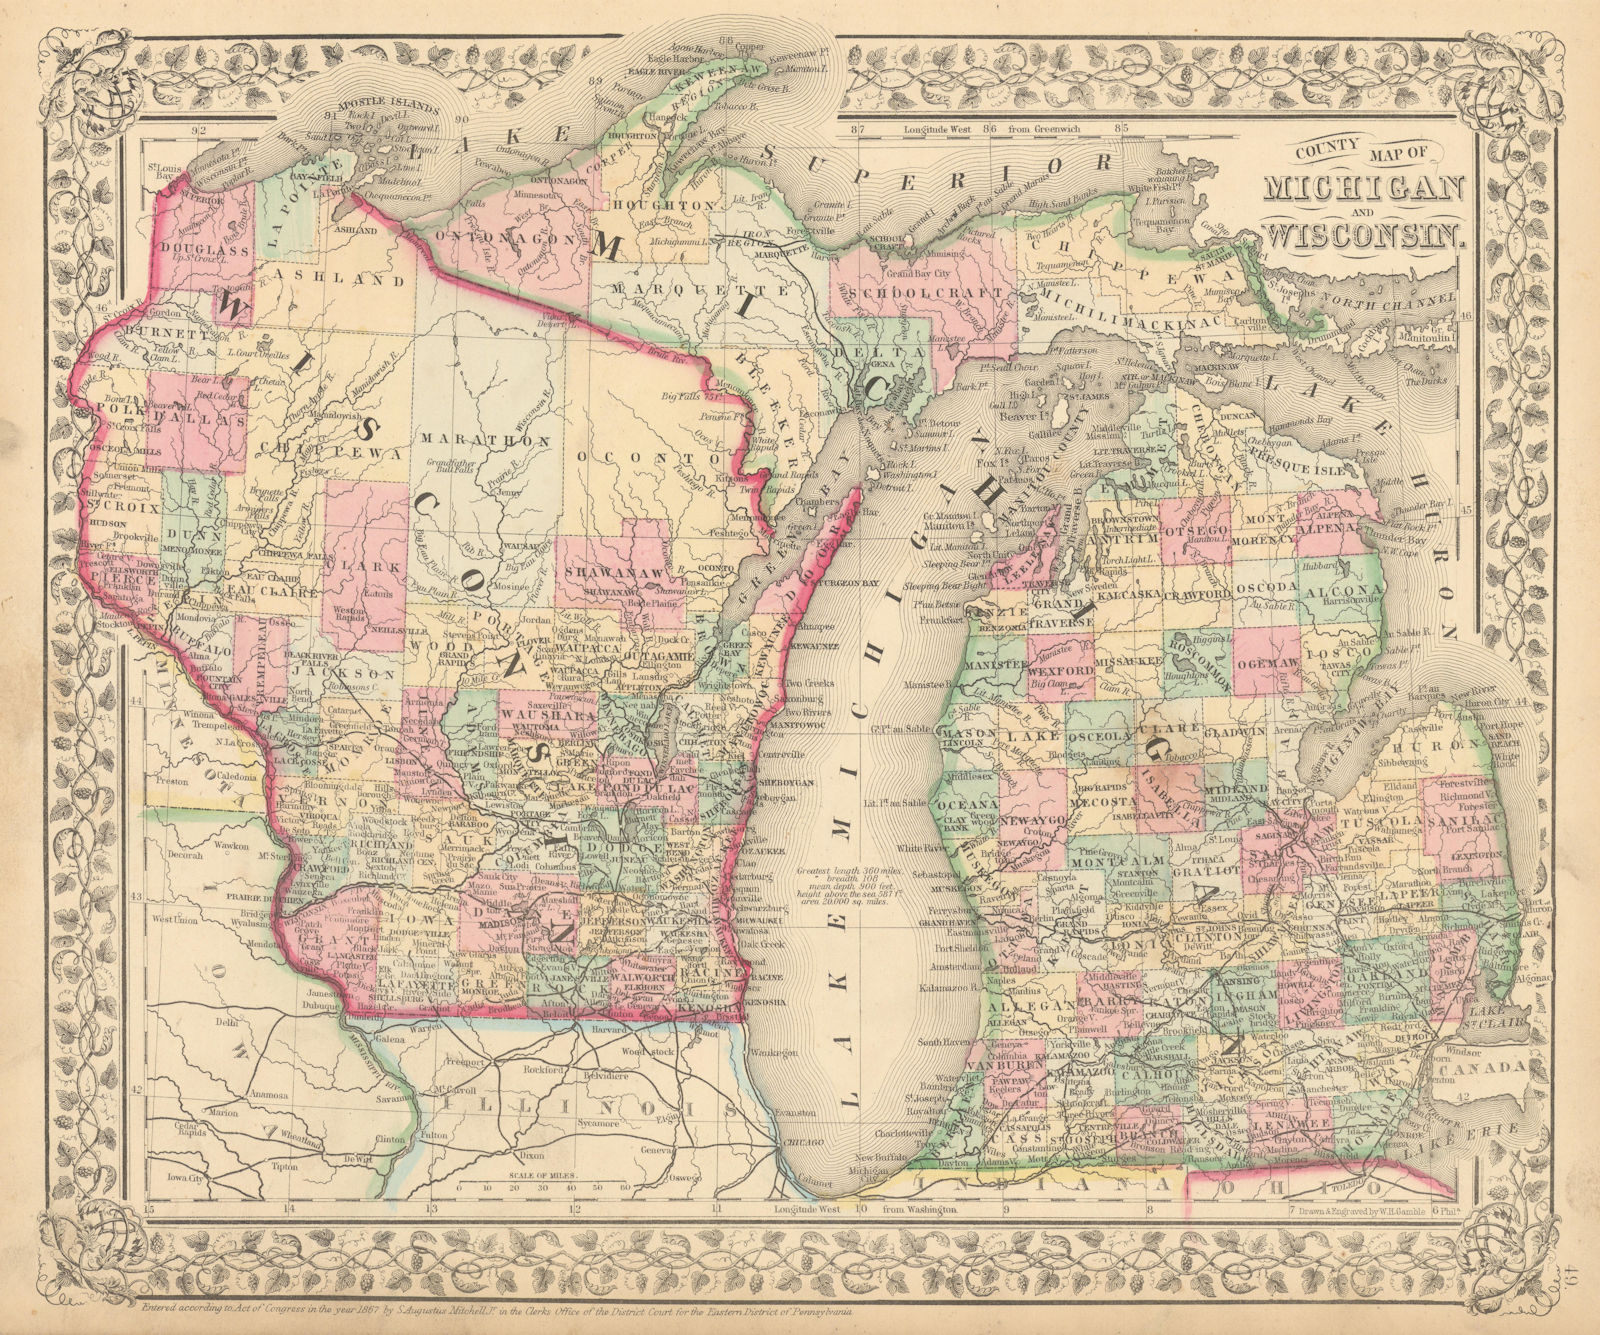 Associate Product County map of Michigan and Wisconsin by S. Augustus Mitchell. State map 1869